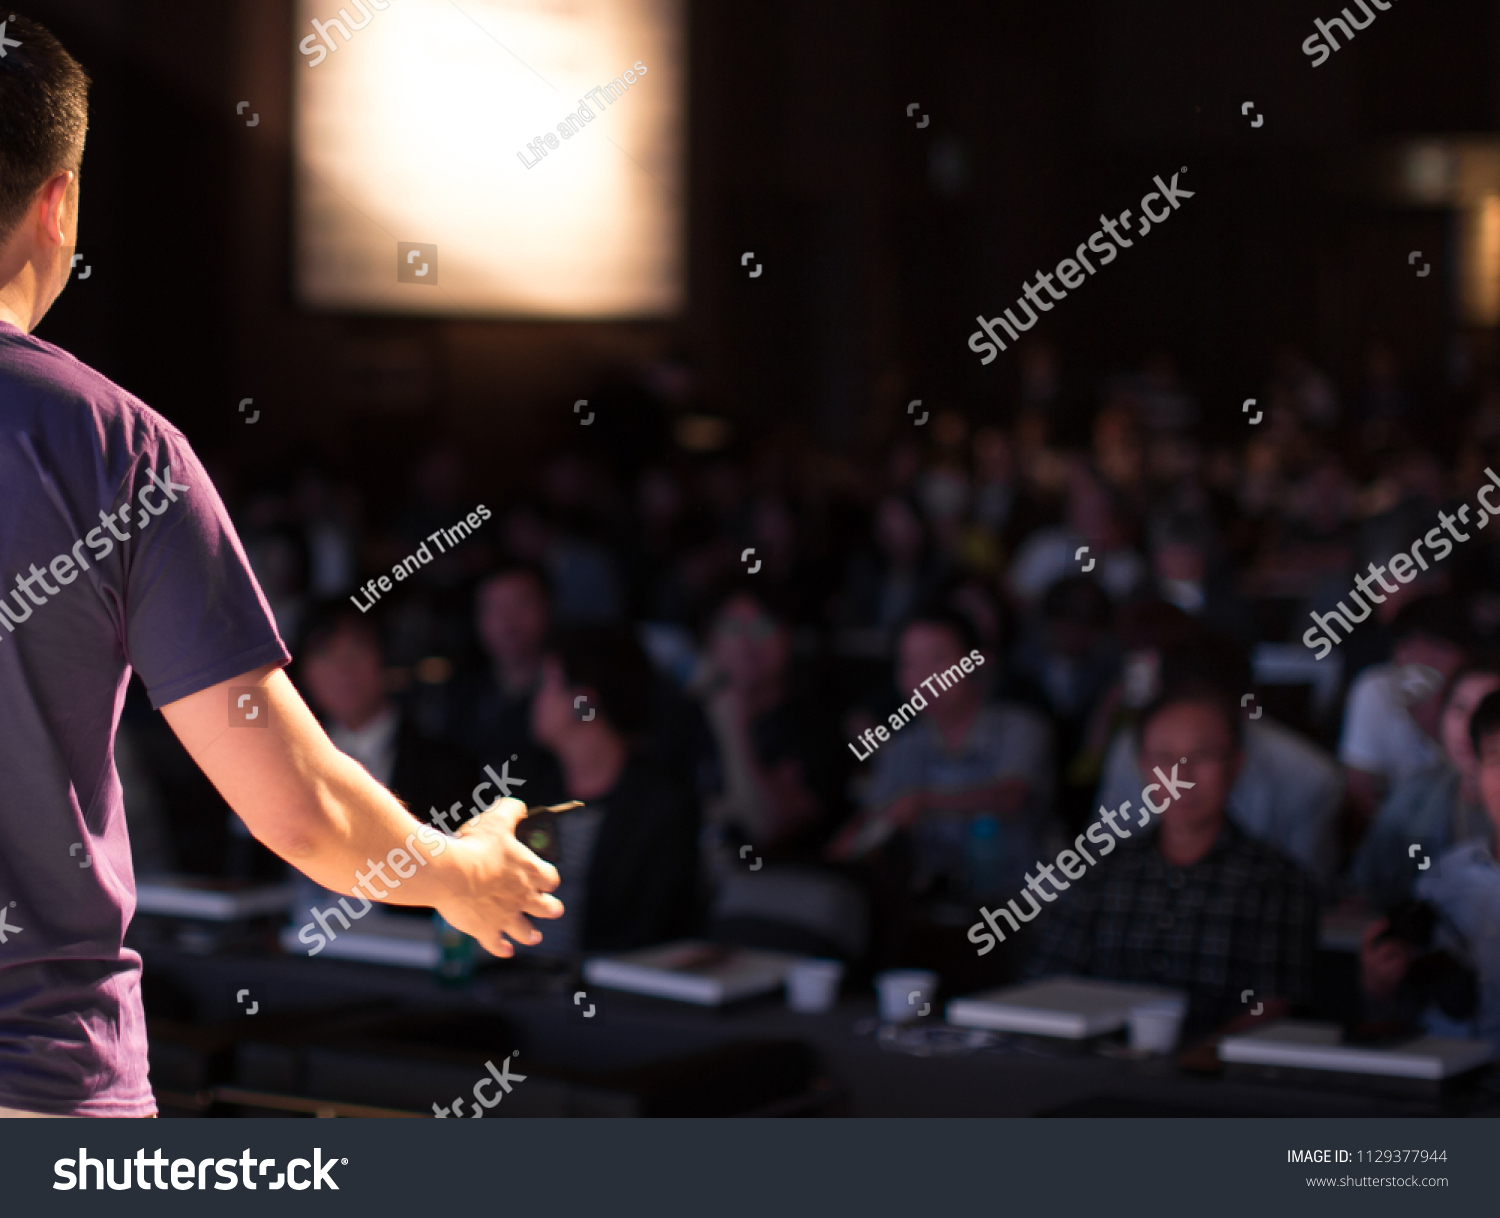 Presenter Speaking to Audience People in Conference Hall Auditorium. Presentation Stage. Blurred De-focused Unidentifiable Audience and Presenter. Technology. Casual Attire Presenter. #1129377944